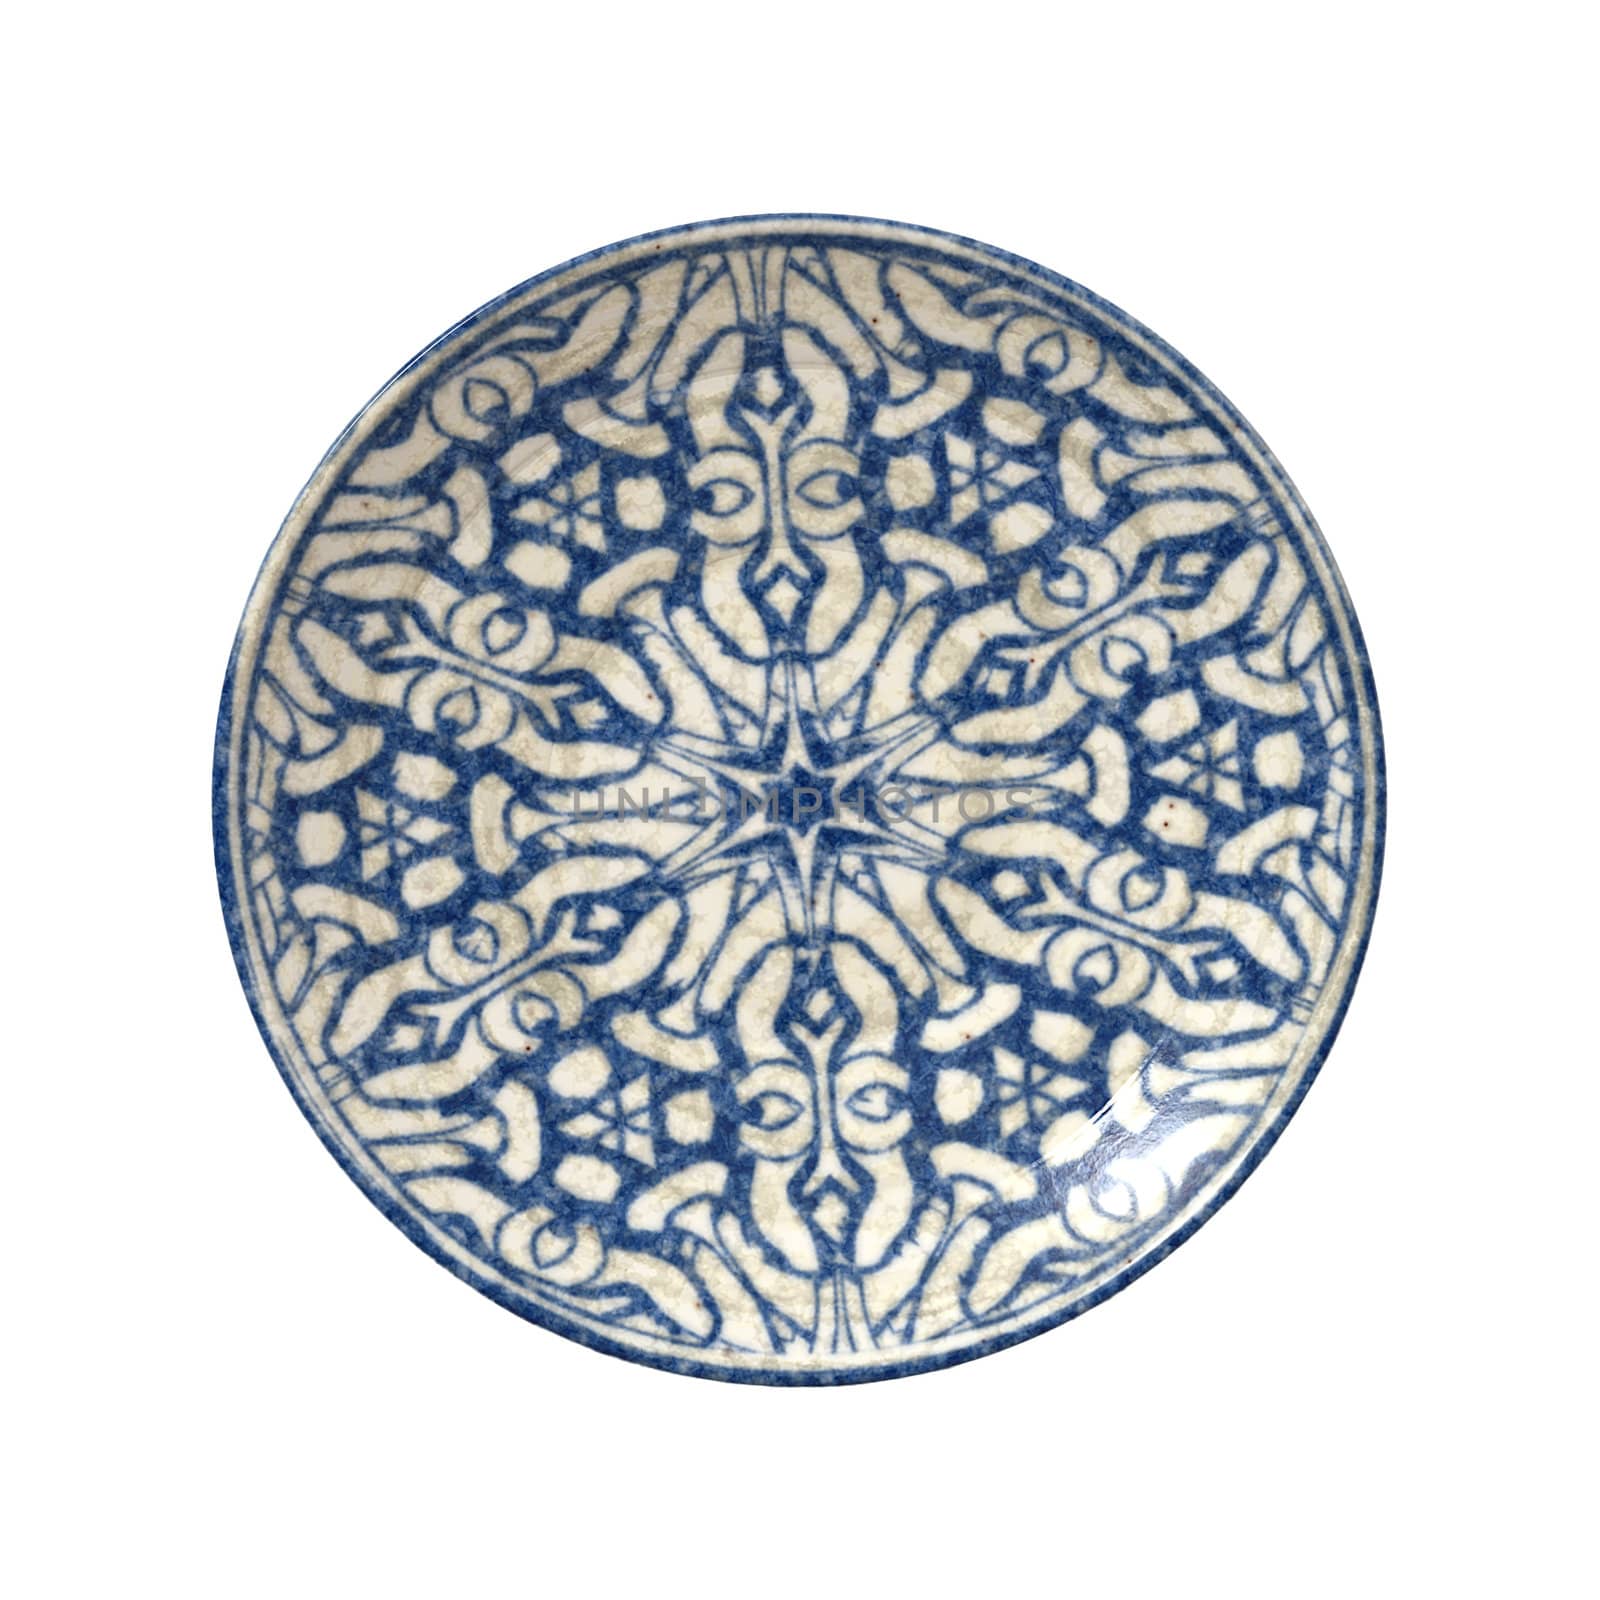 An image of a nice blue pottery plate